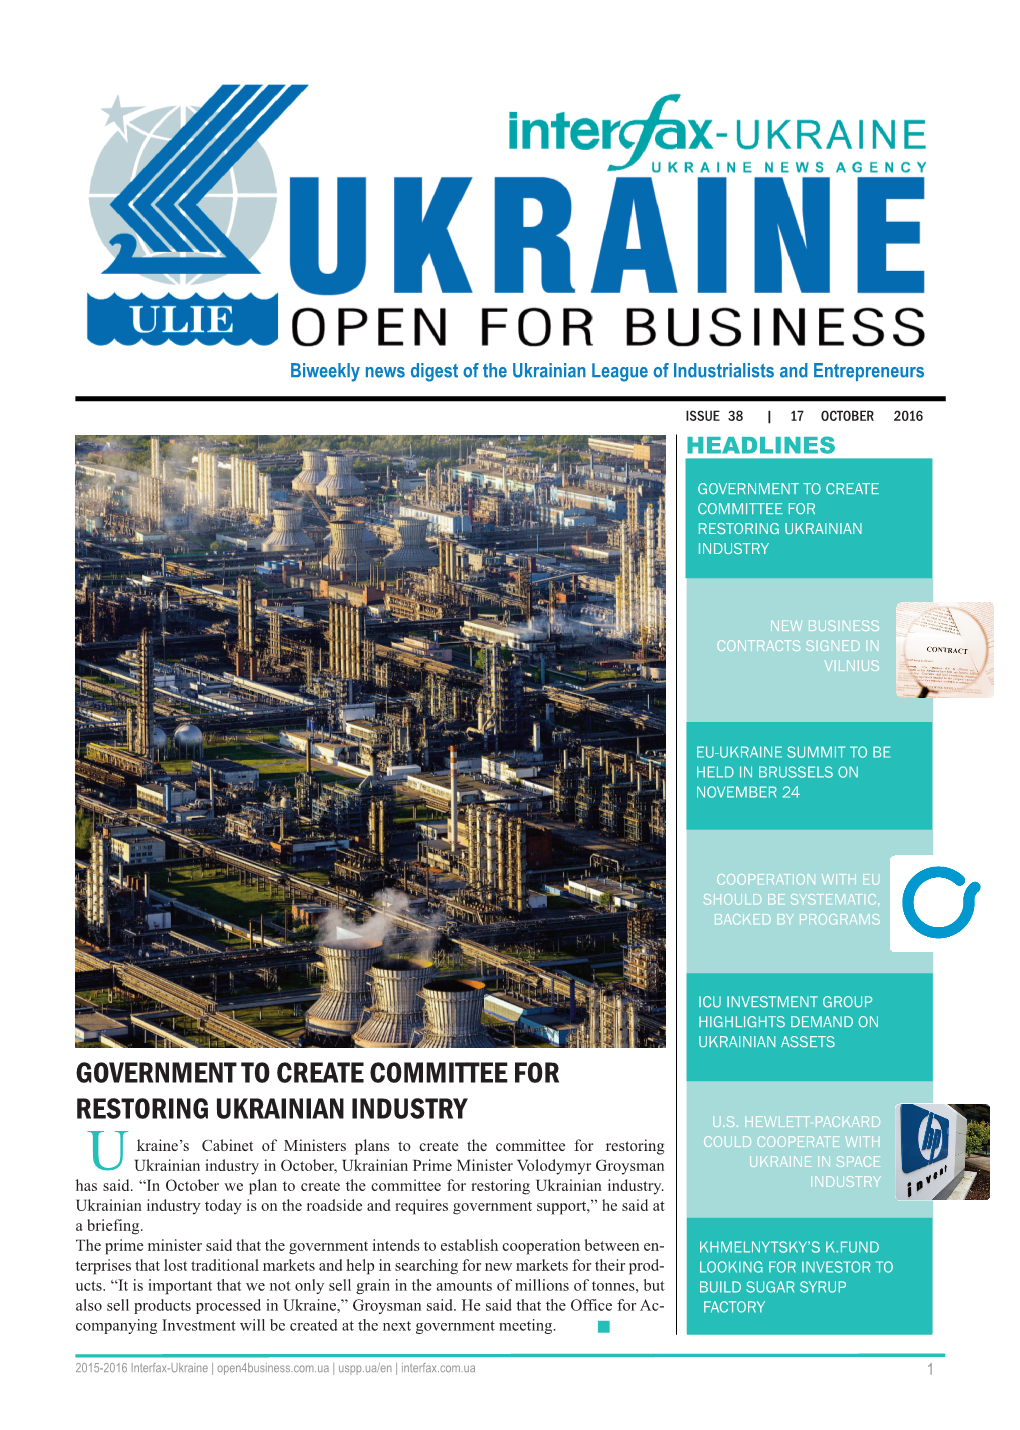 Government to Create Committee for Restoring Ukrainian Industry